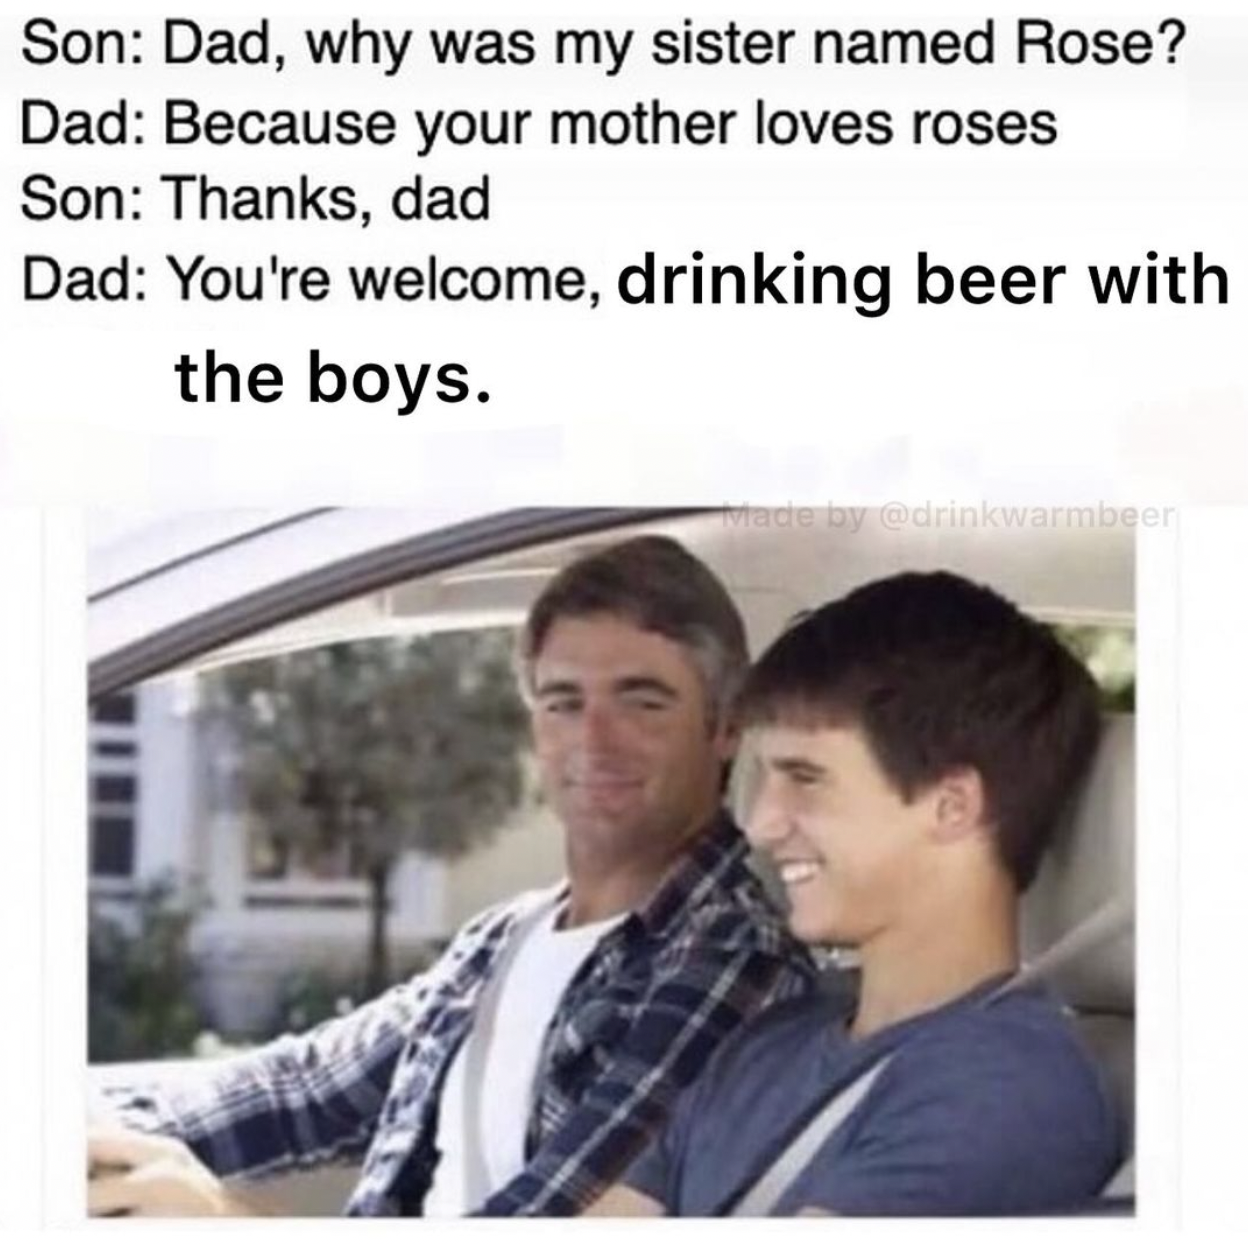 dad why is my sister's name rose - Son Dad, why was my sister named Rose? Dad Because your mother loves roses Son Thanks, dad Dad You're welcome, drinking beer with the boys. Made by